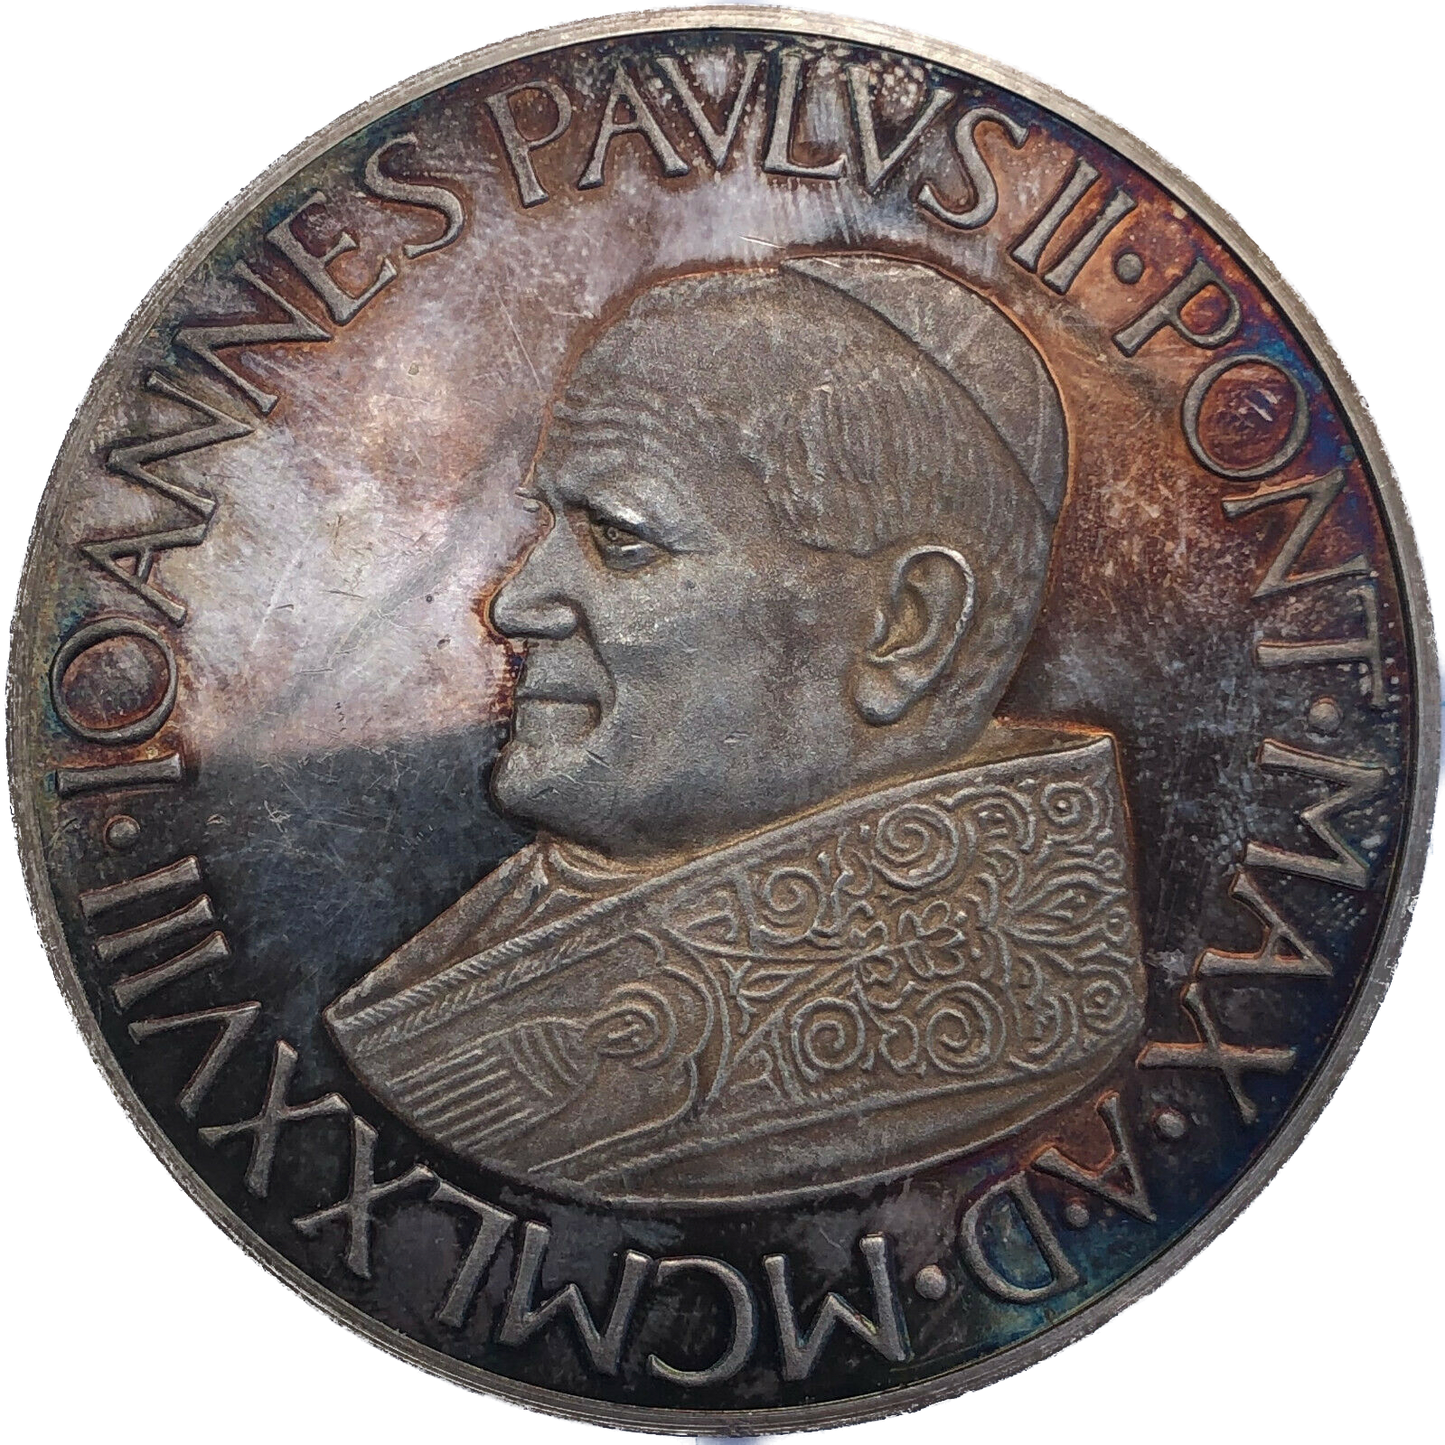 1978 ITALY Investiture of John Paul II as Pope 57mm silver medal EF